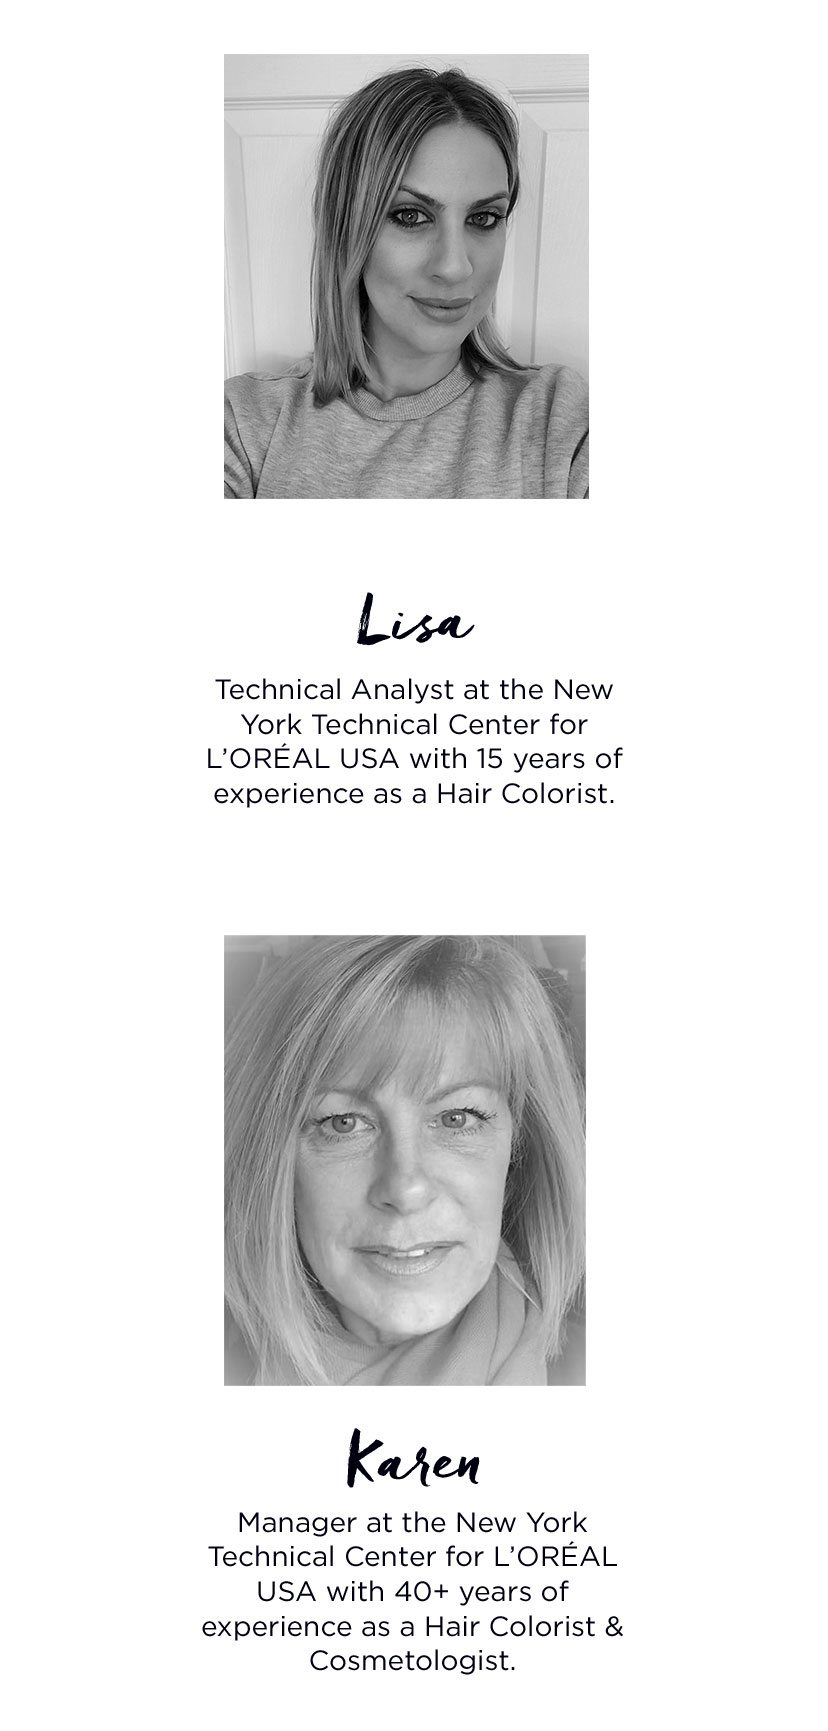 Lisa-Technical Analyst with 15 years of experience as a Hair Colorist. - Karen-Manager with 40 plus years of experience as a Hair Colorist and Cosmetologist.